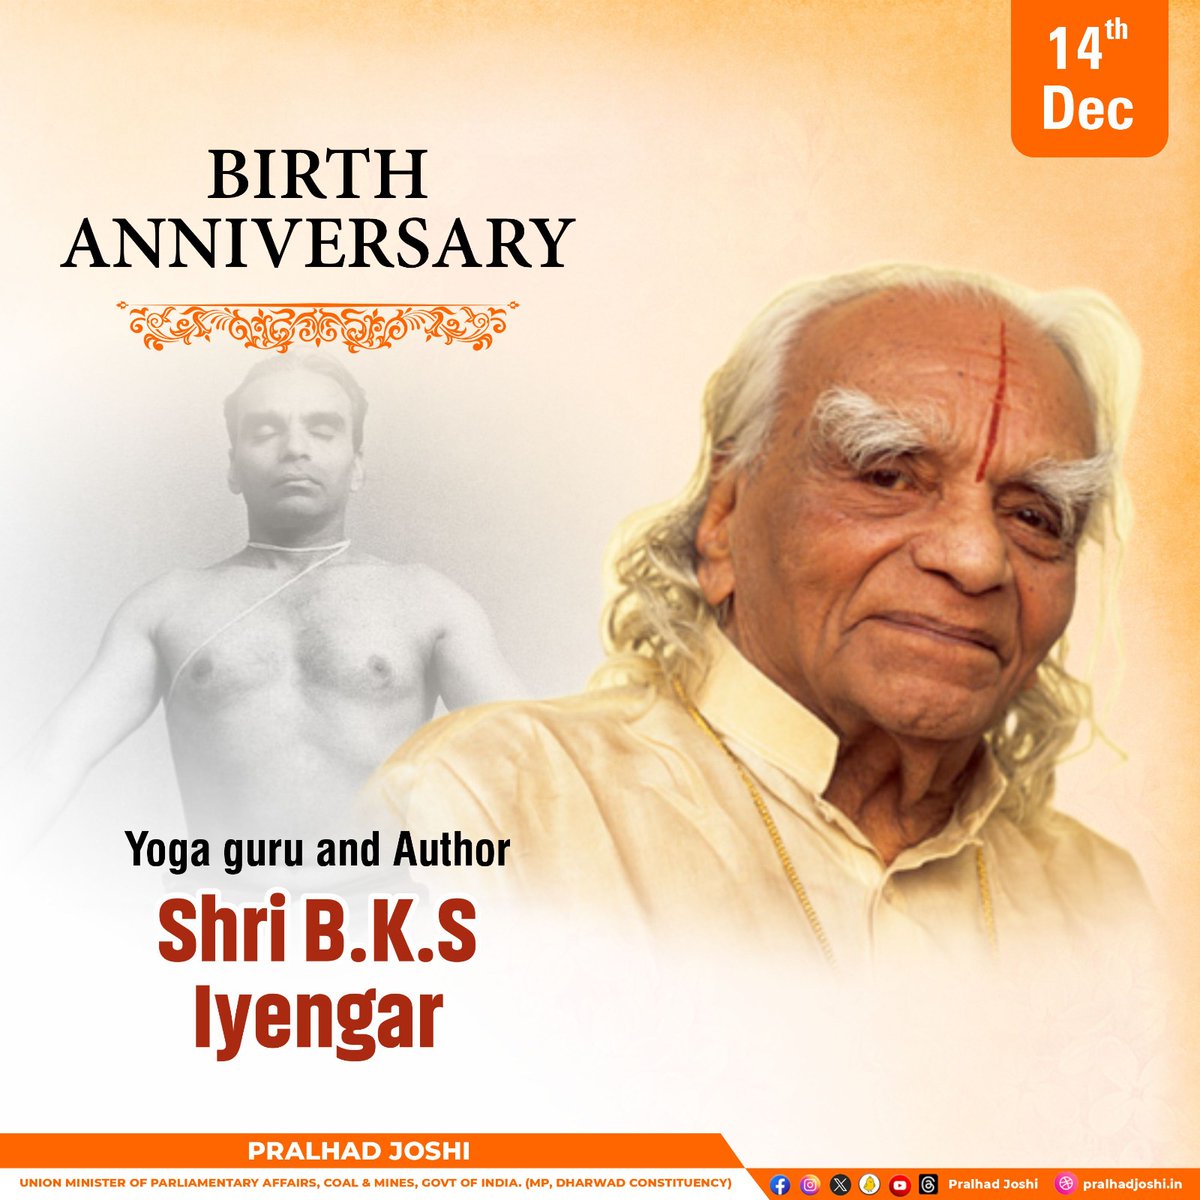 India's contributions to the world are many and one of the greatest among them is YOGA. Padma Vibhushana Shri BKS Iyengar dedicated his life to rekindle world's interest in yoga. 

I bow to him in reverence on the occasion of his birth anniversary.

#BKSIyengar